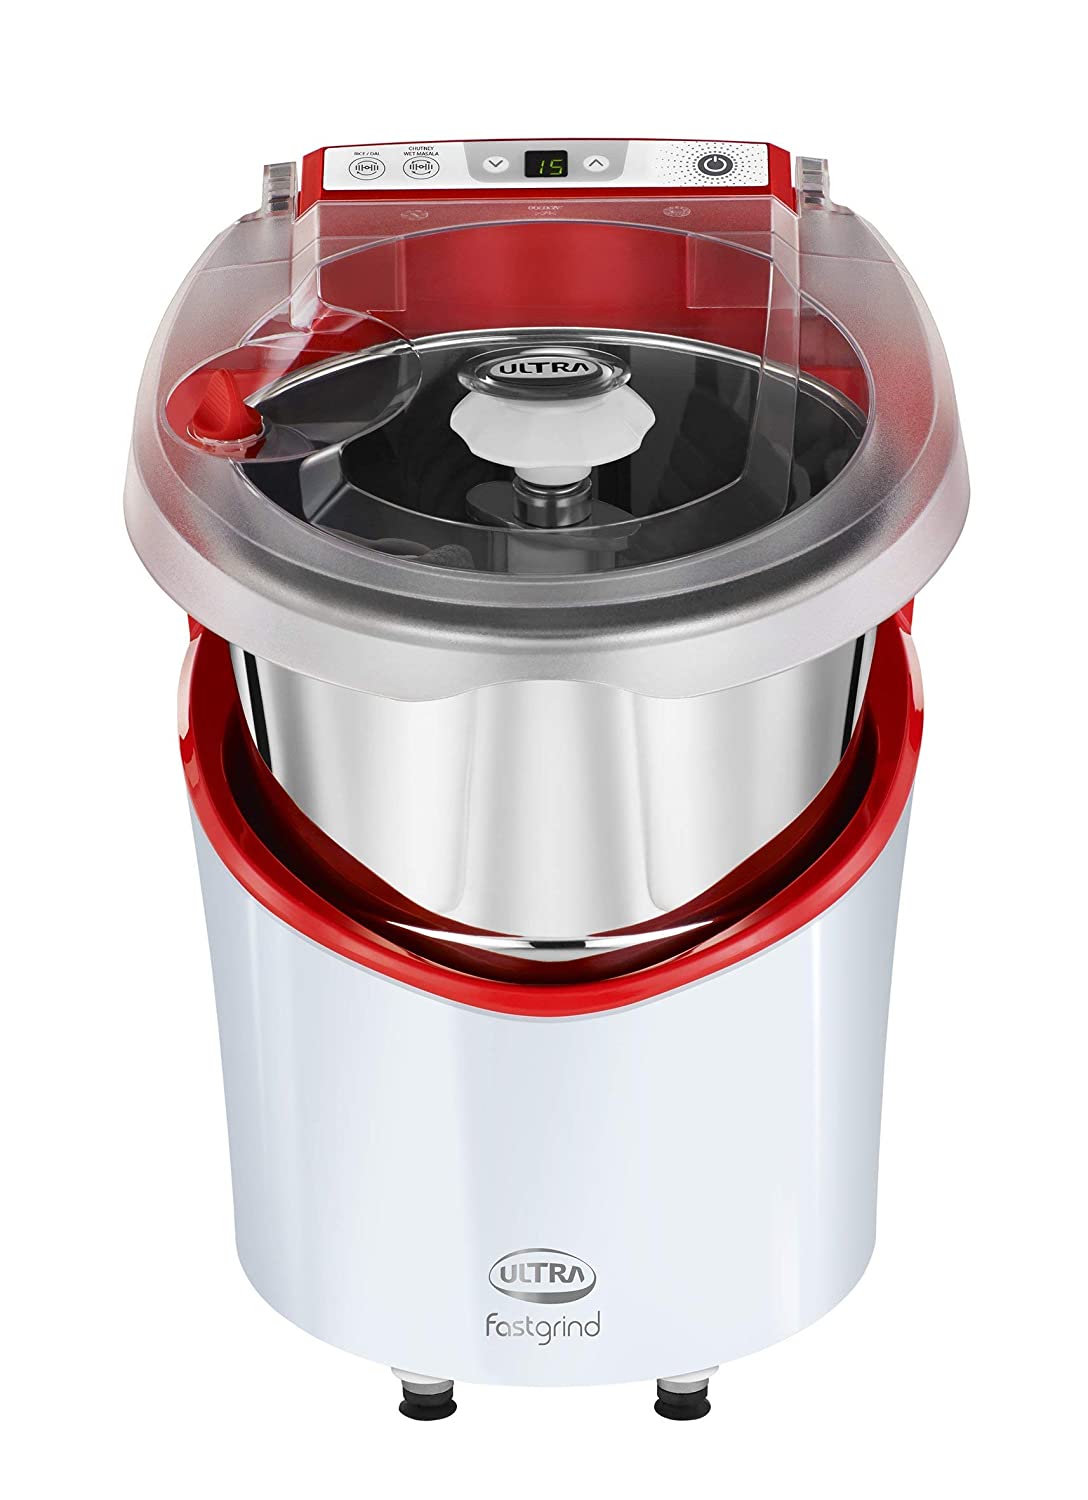 Ultra Elgi Fastgrind 2L Wet Grinder with Digital Timer (Fortune White with Red Top Cover)